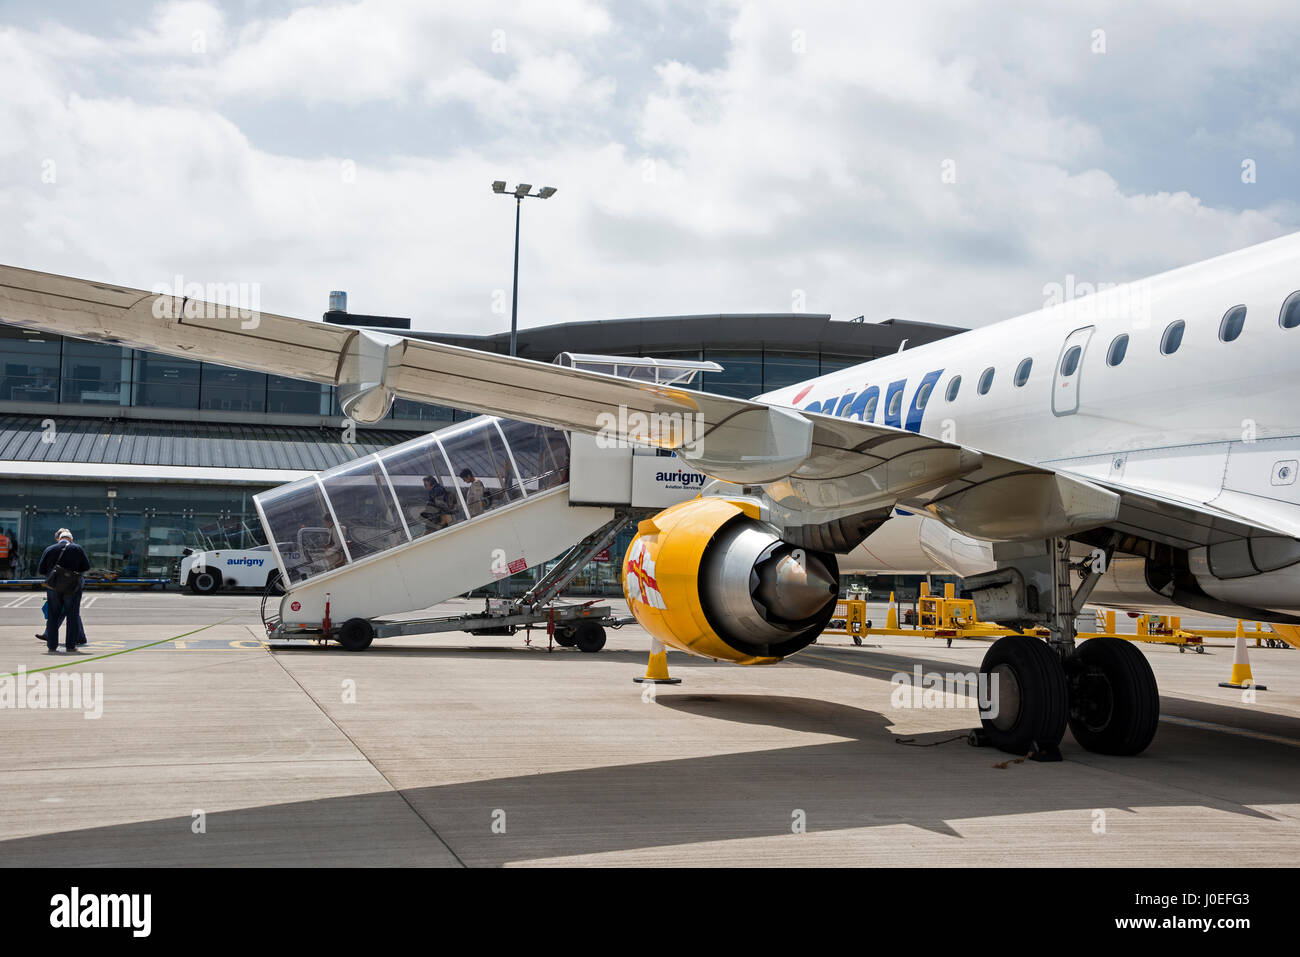 Passengers disembarking at Guernsey airport from an Aurigny aircraft in the Channel Islands.   The aircraft serving Gatwick and Guernsey is a Brazilia Stock Photo